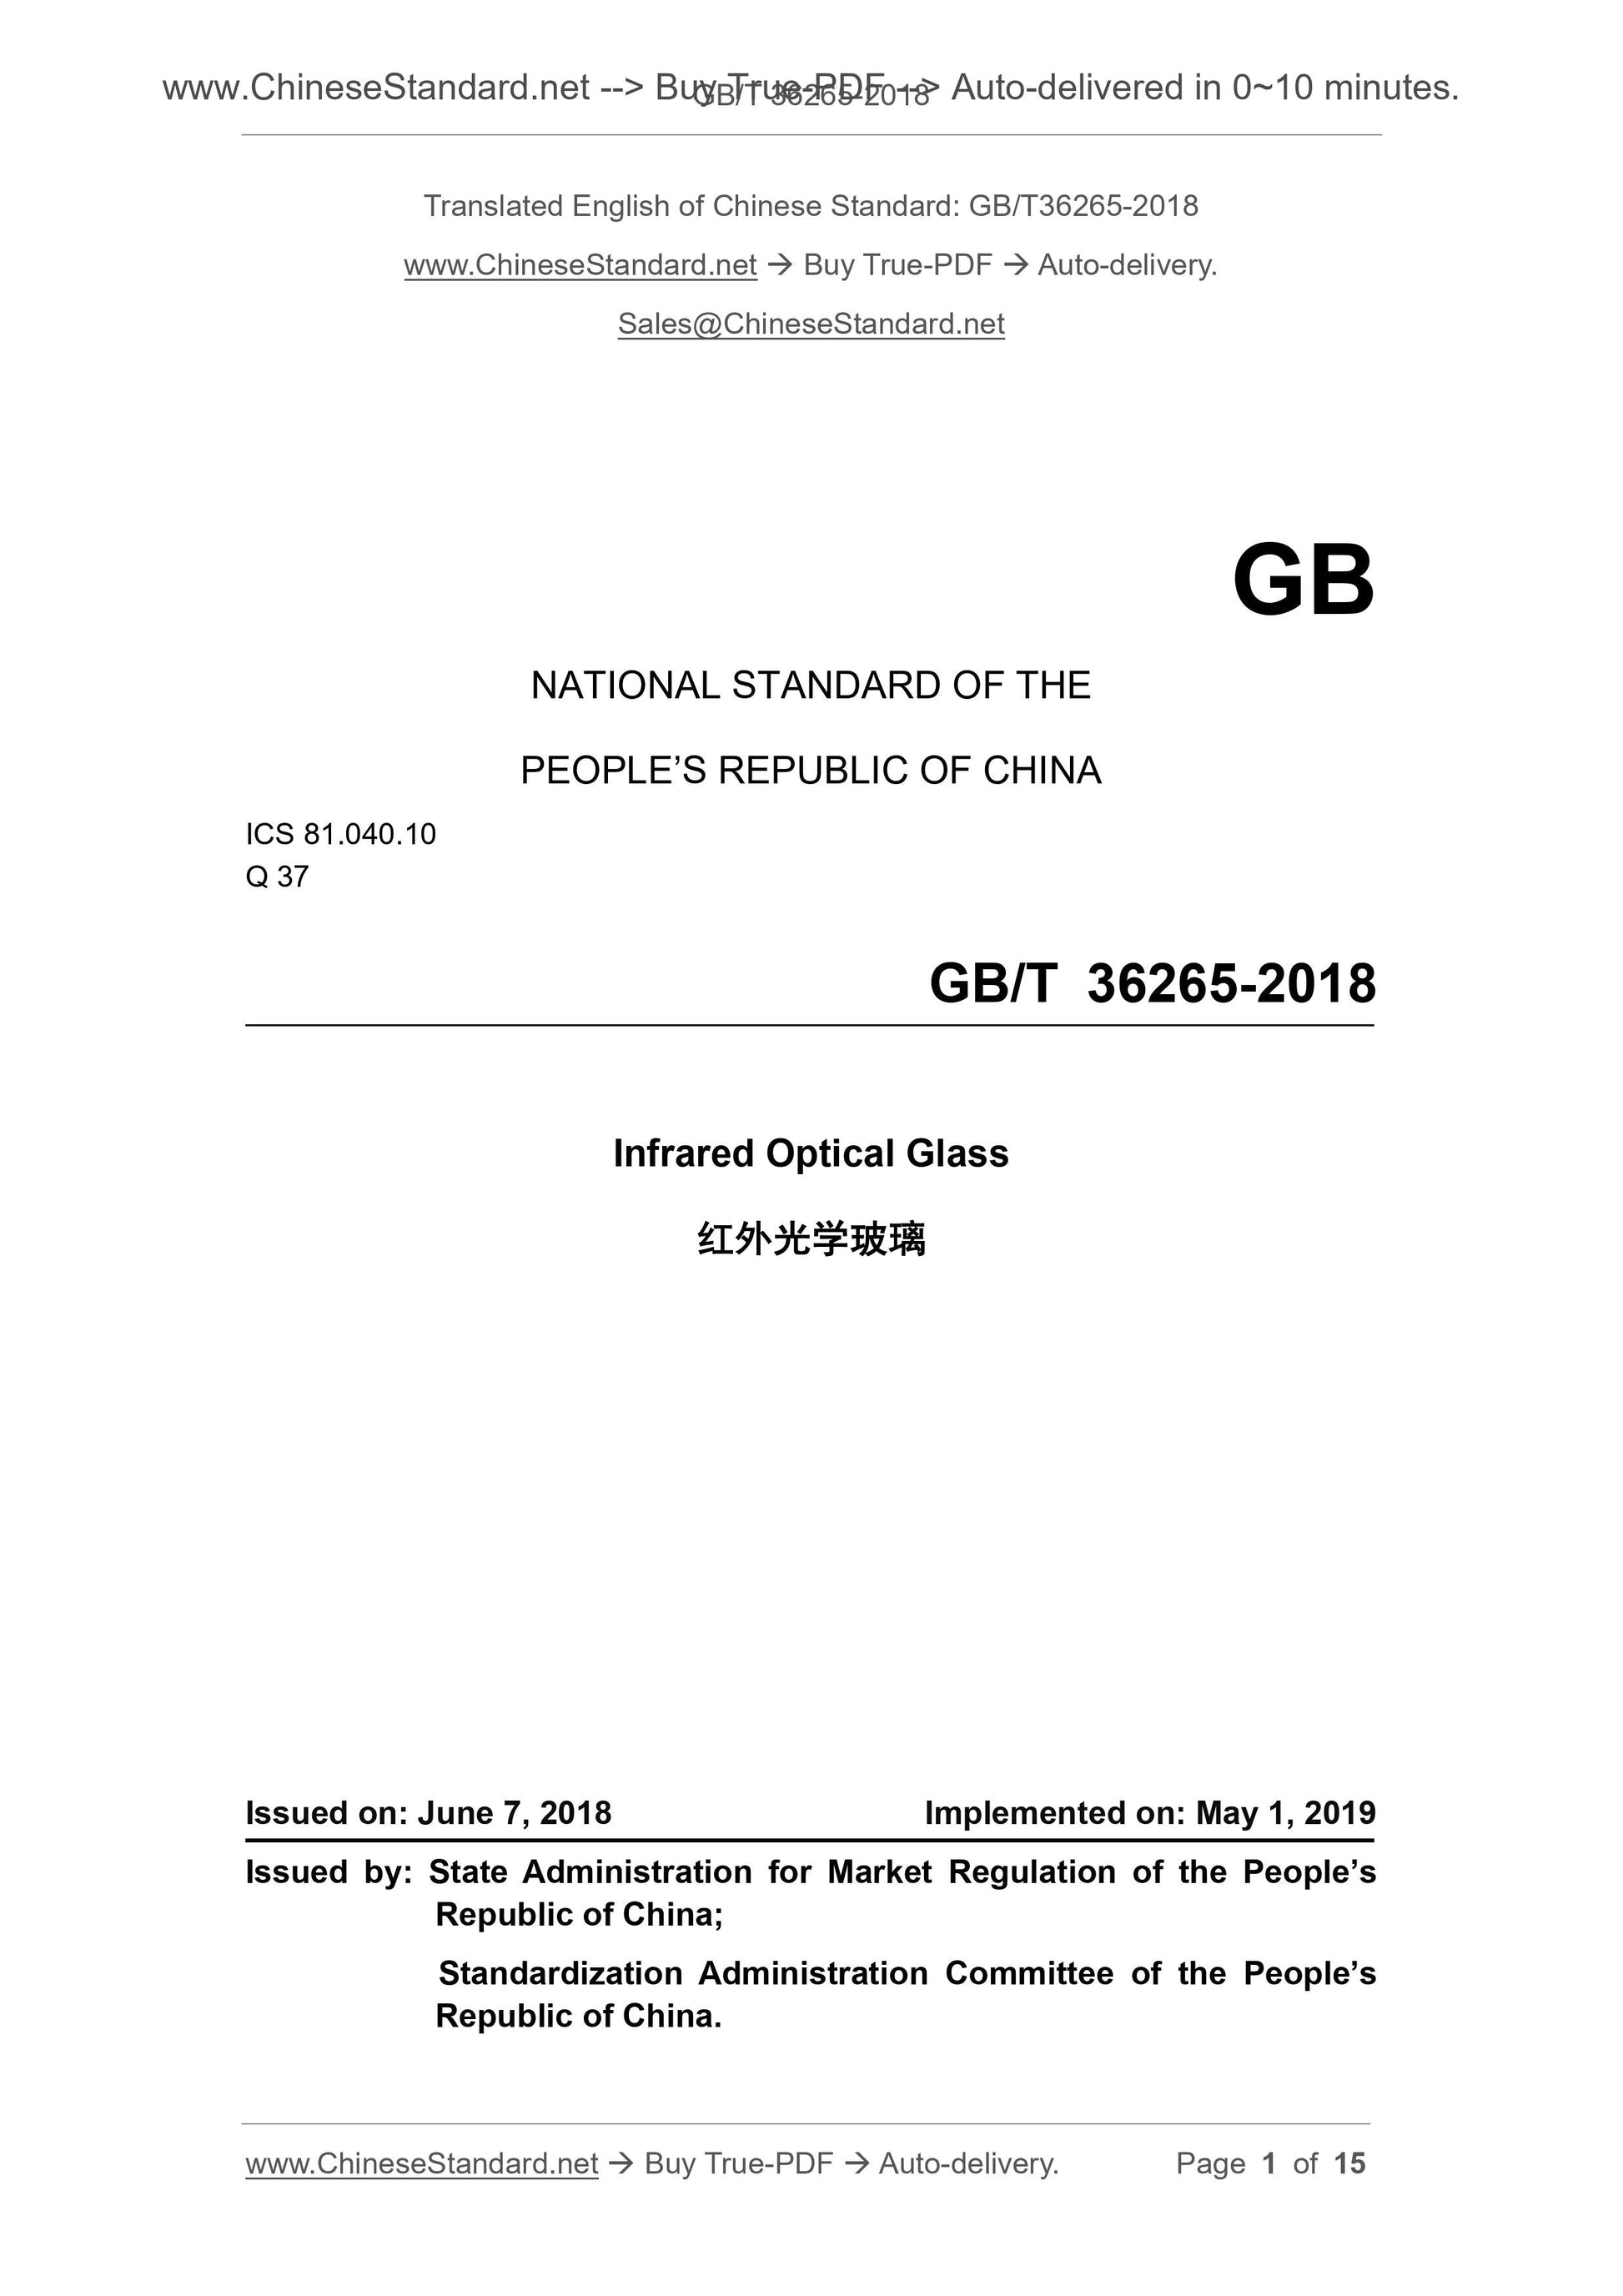 GB/T 36265-2018 Page 1